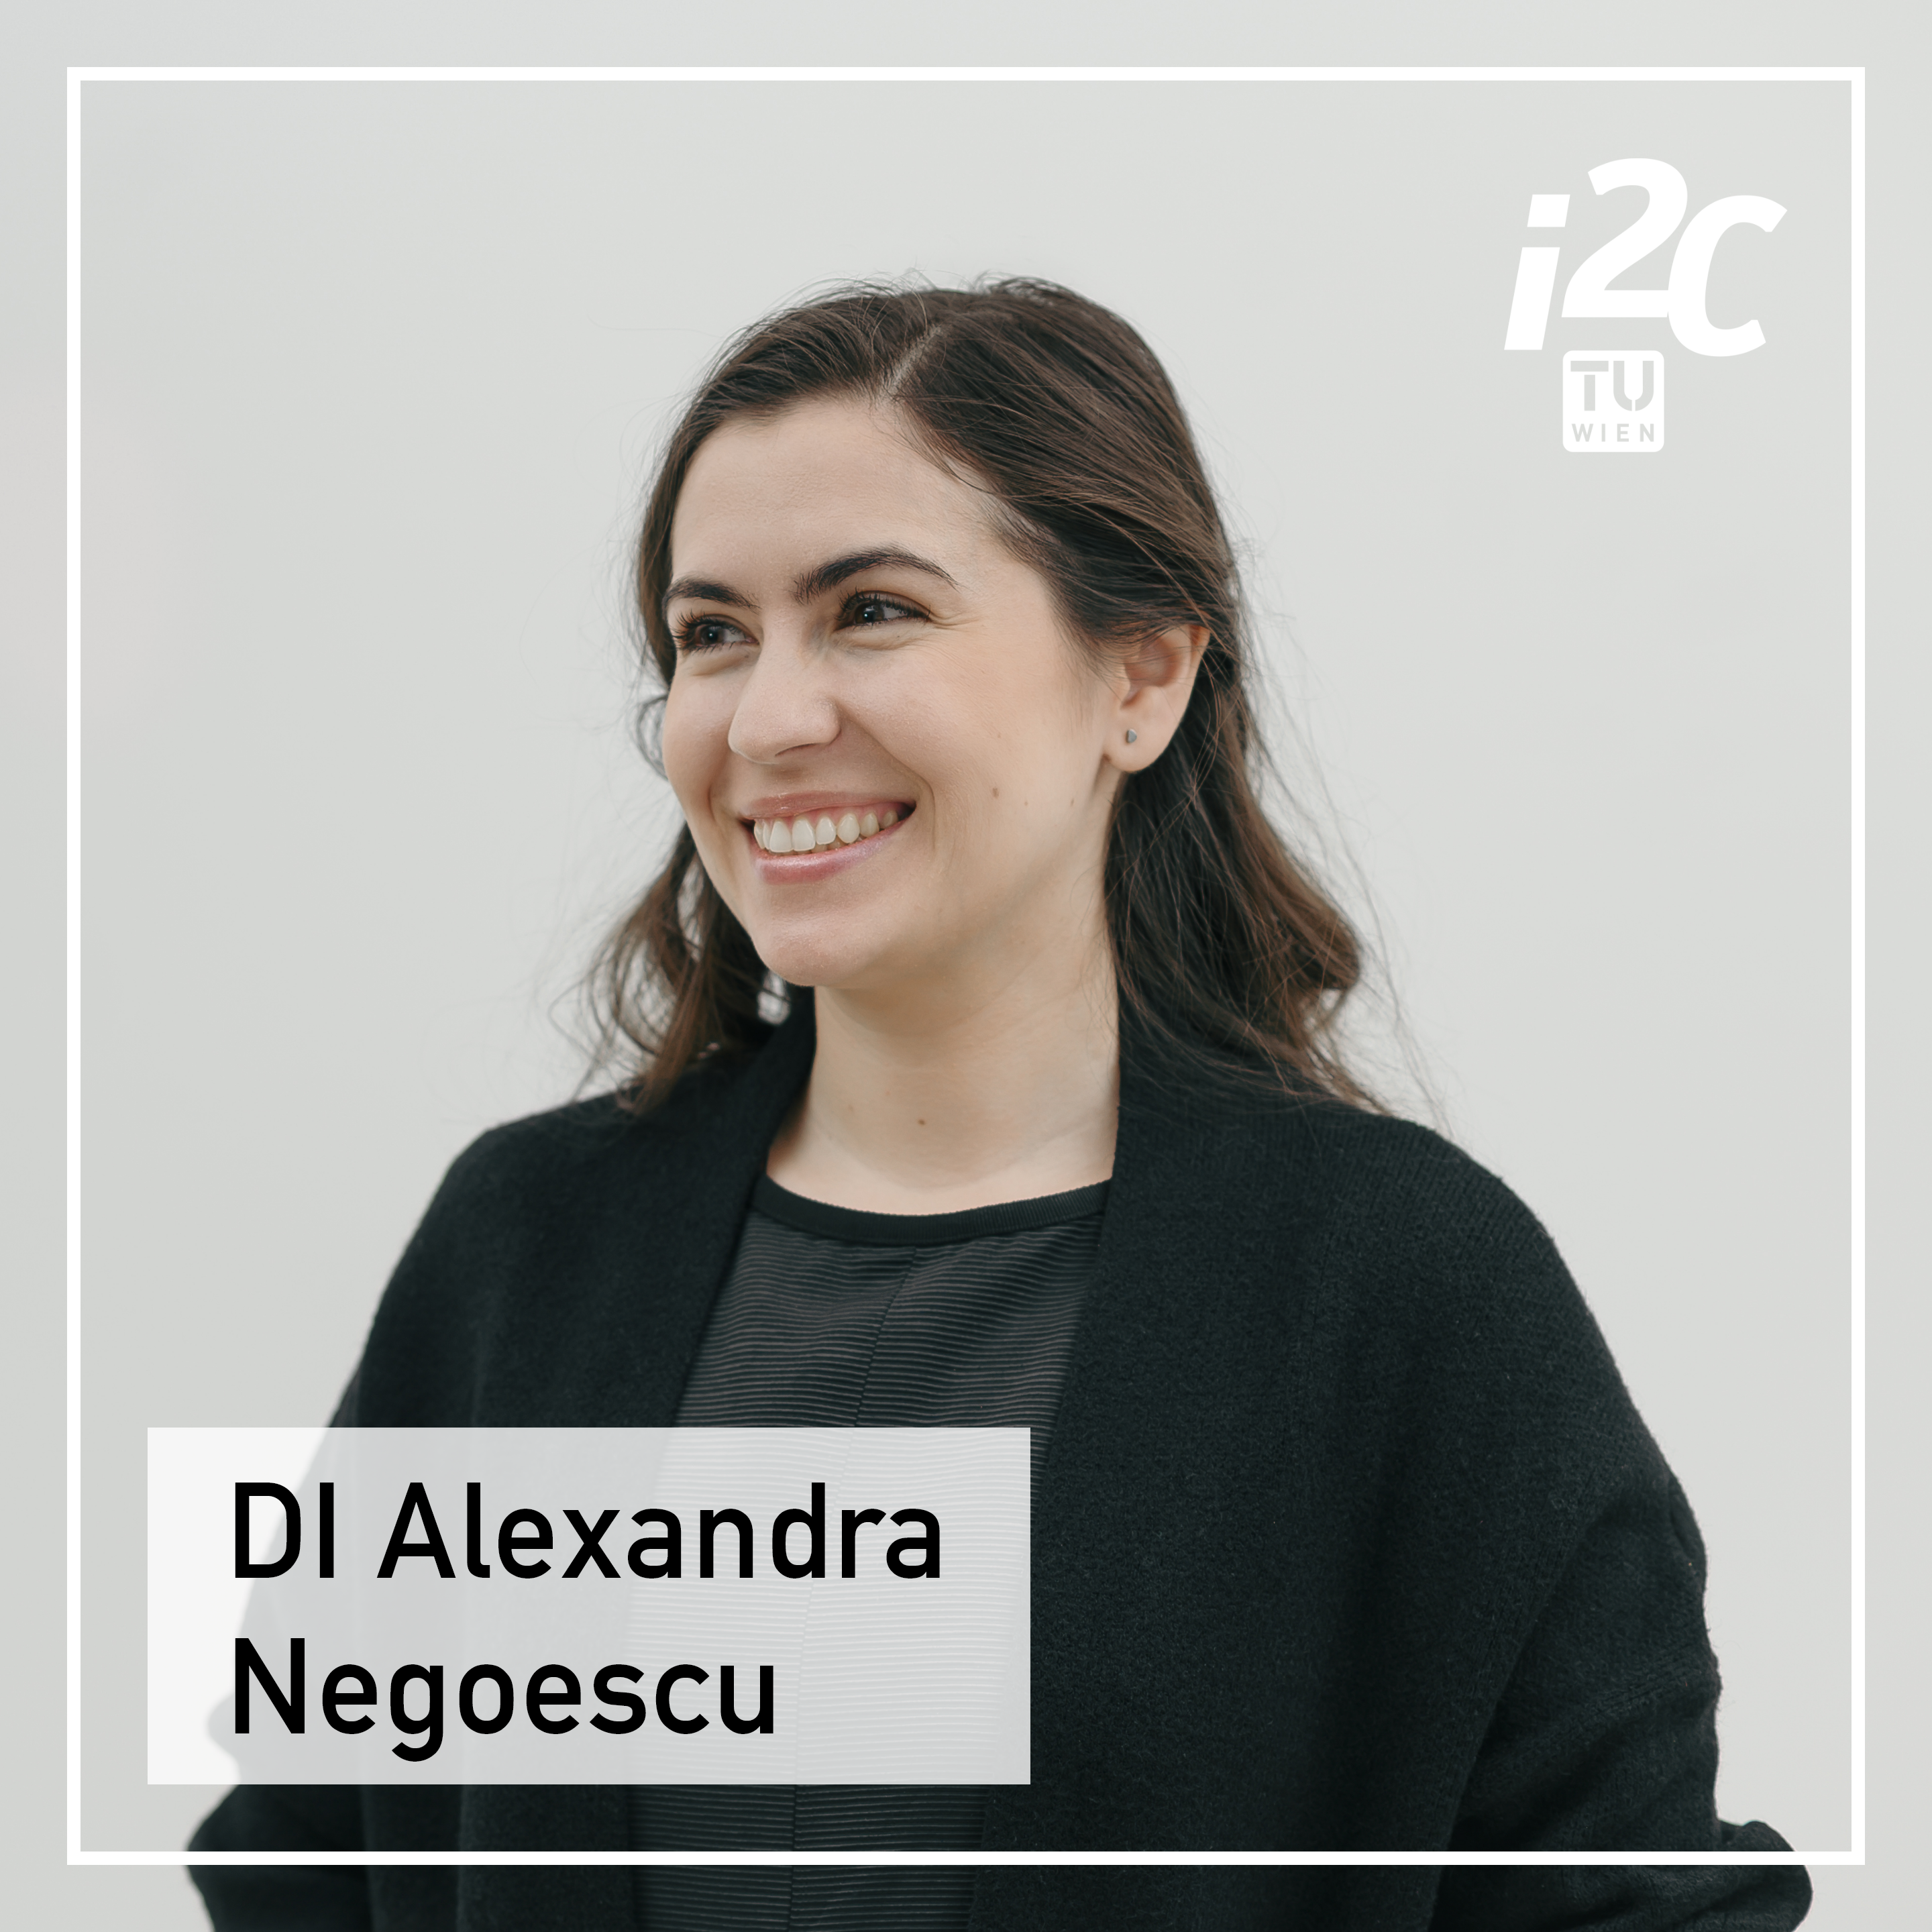 Alexandra Negoescu is the Scientific Program Manager of the TUW i²c